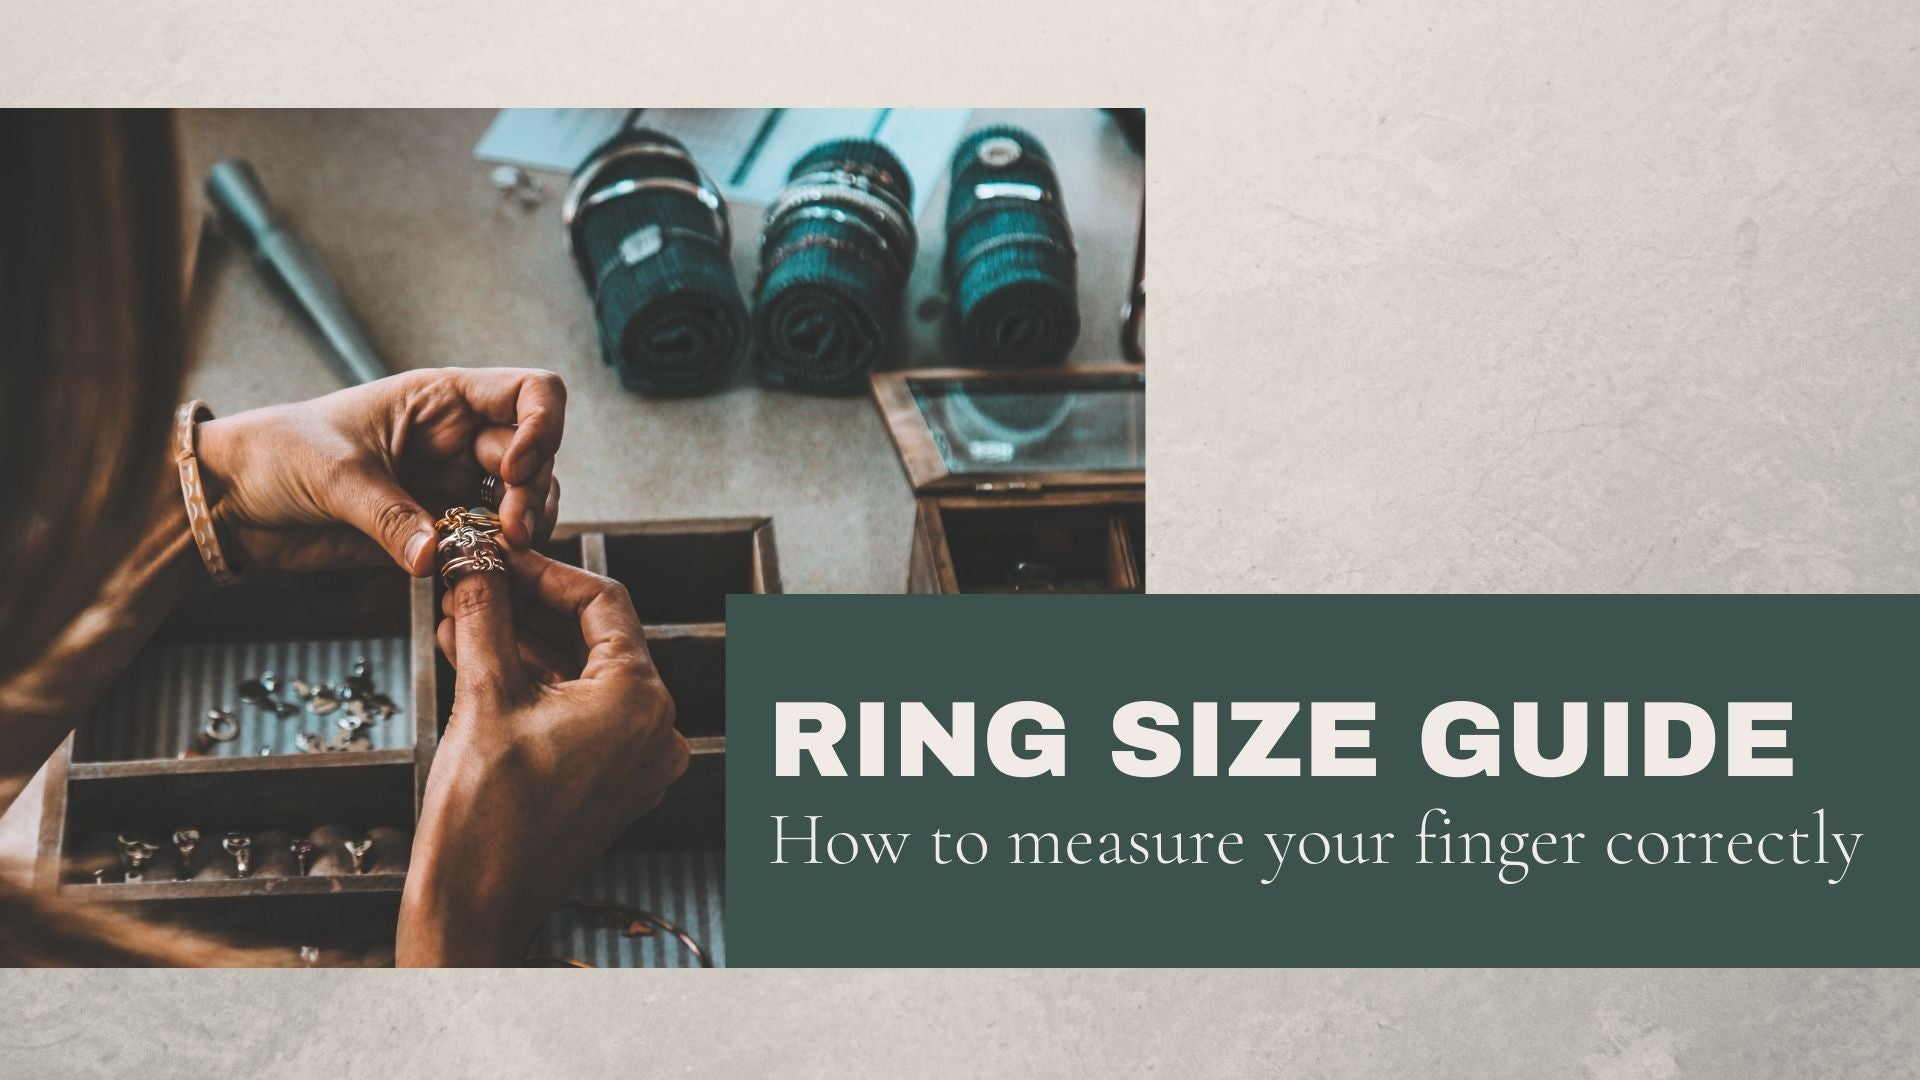 Finger Ring Sizer Measuring Tool - Know Your Ring Size! - It's All